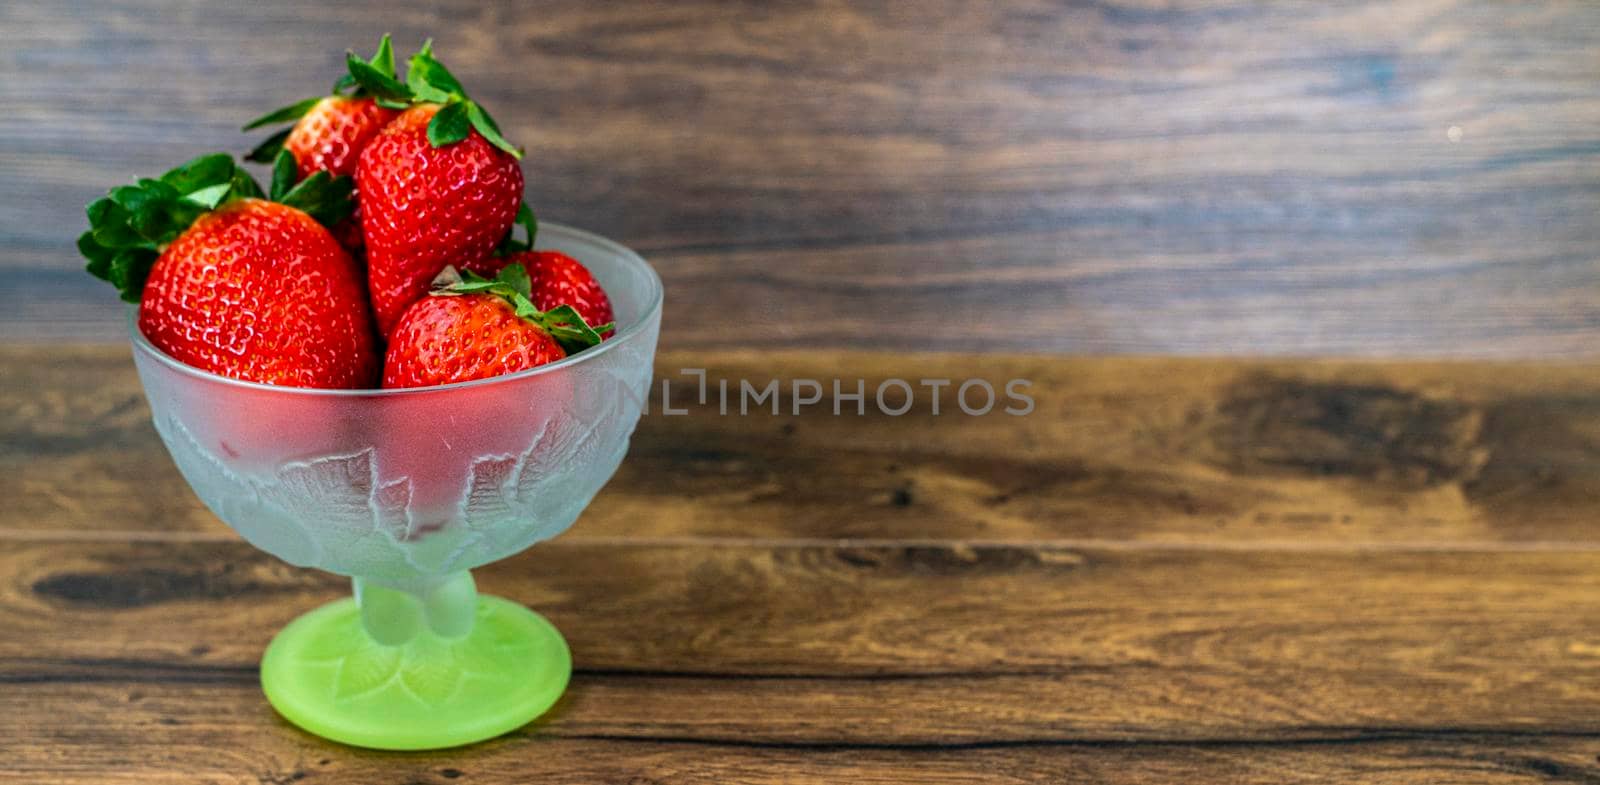 banner of a small cup of ripe strawberries on wood background